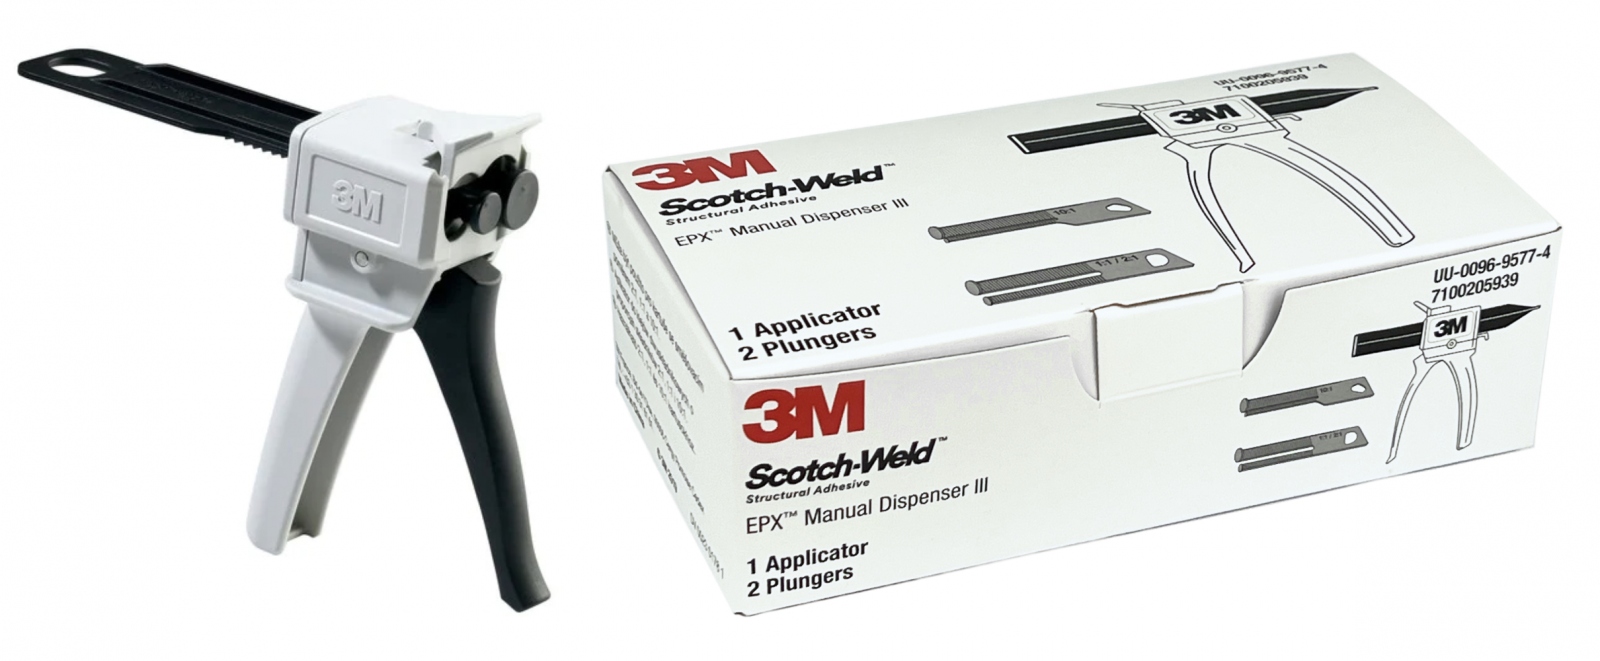 pics/3M/scotch-weld/3m-scotch-weld-epx-manual-dispenser-iii-applicator-for-2c-cartridges-with-2-plungers-00.jpg